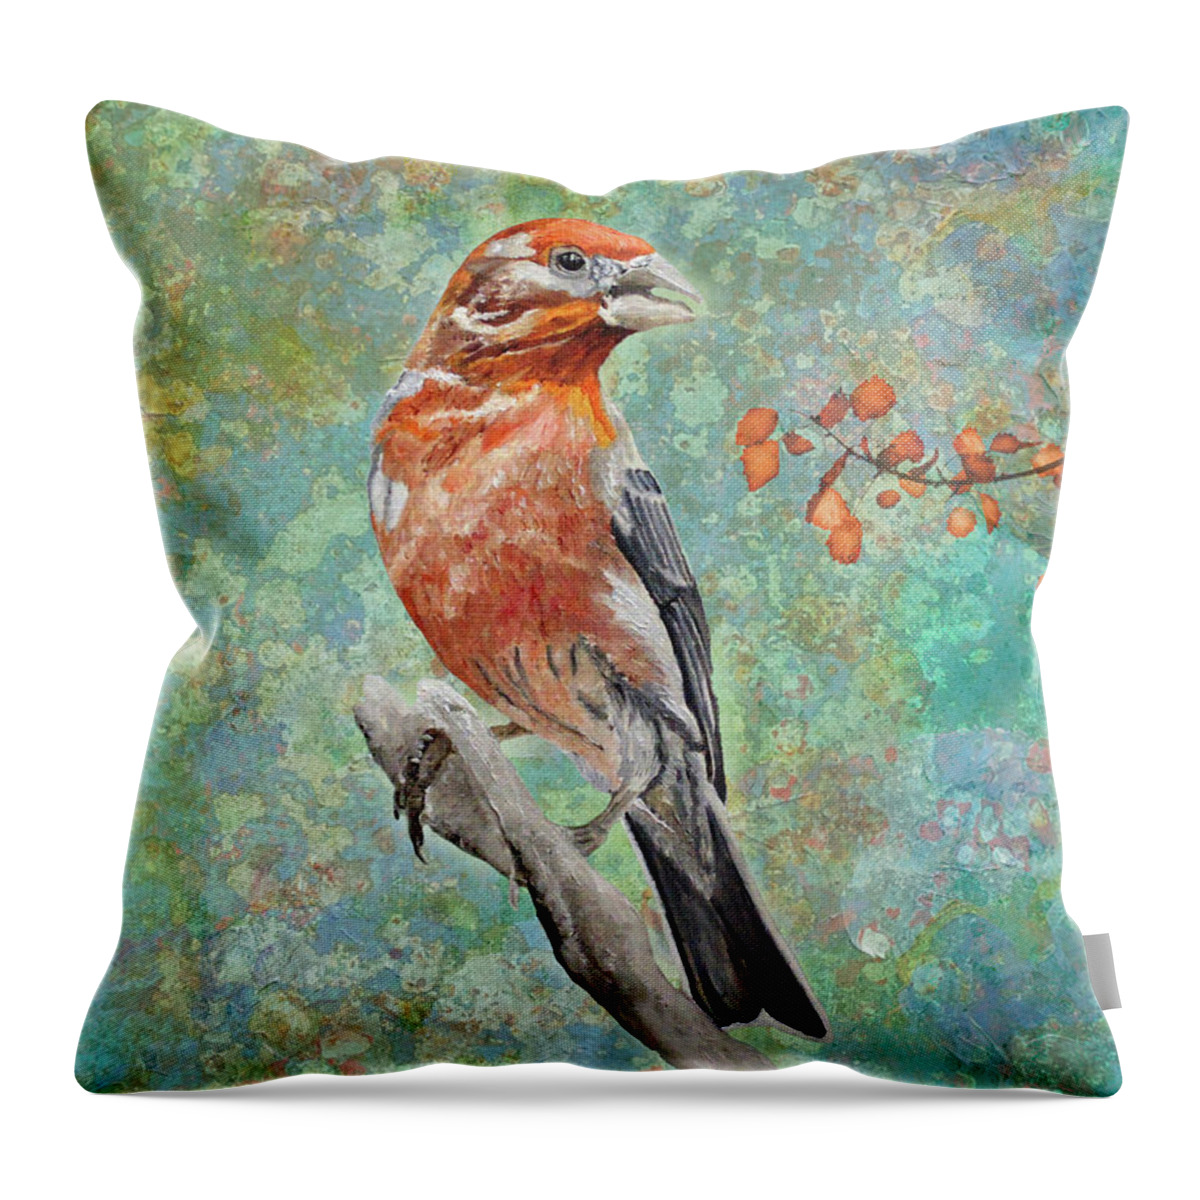 Finch Throw Pillow featuring the painting Looking Forward To The Spring by Angeles M Pomata